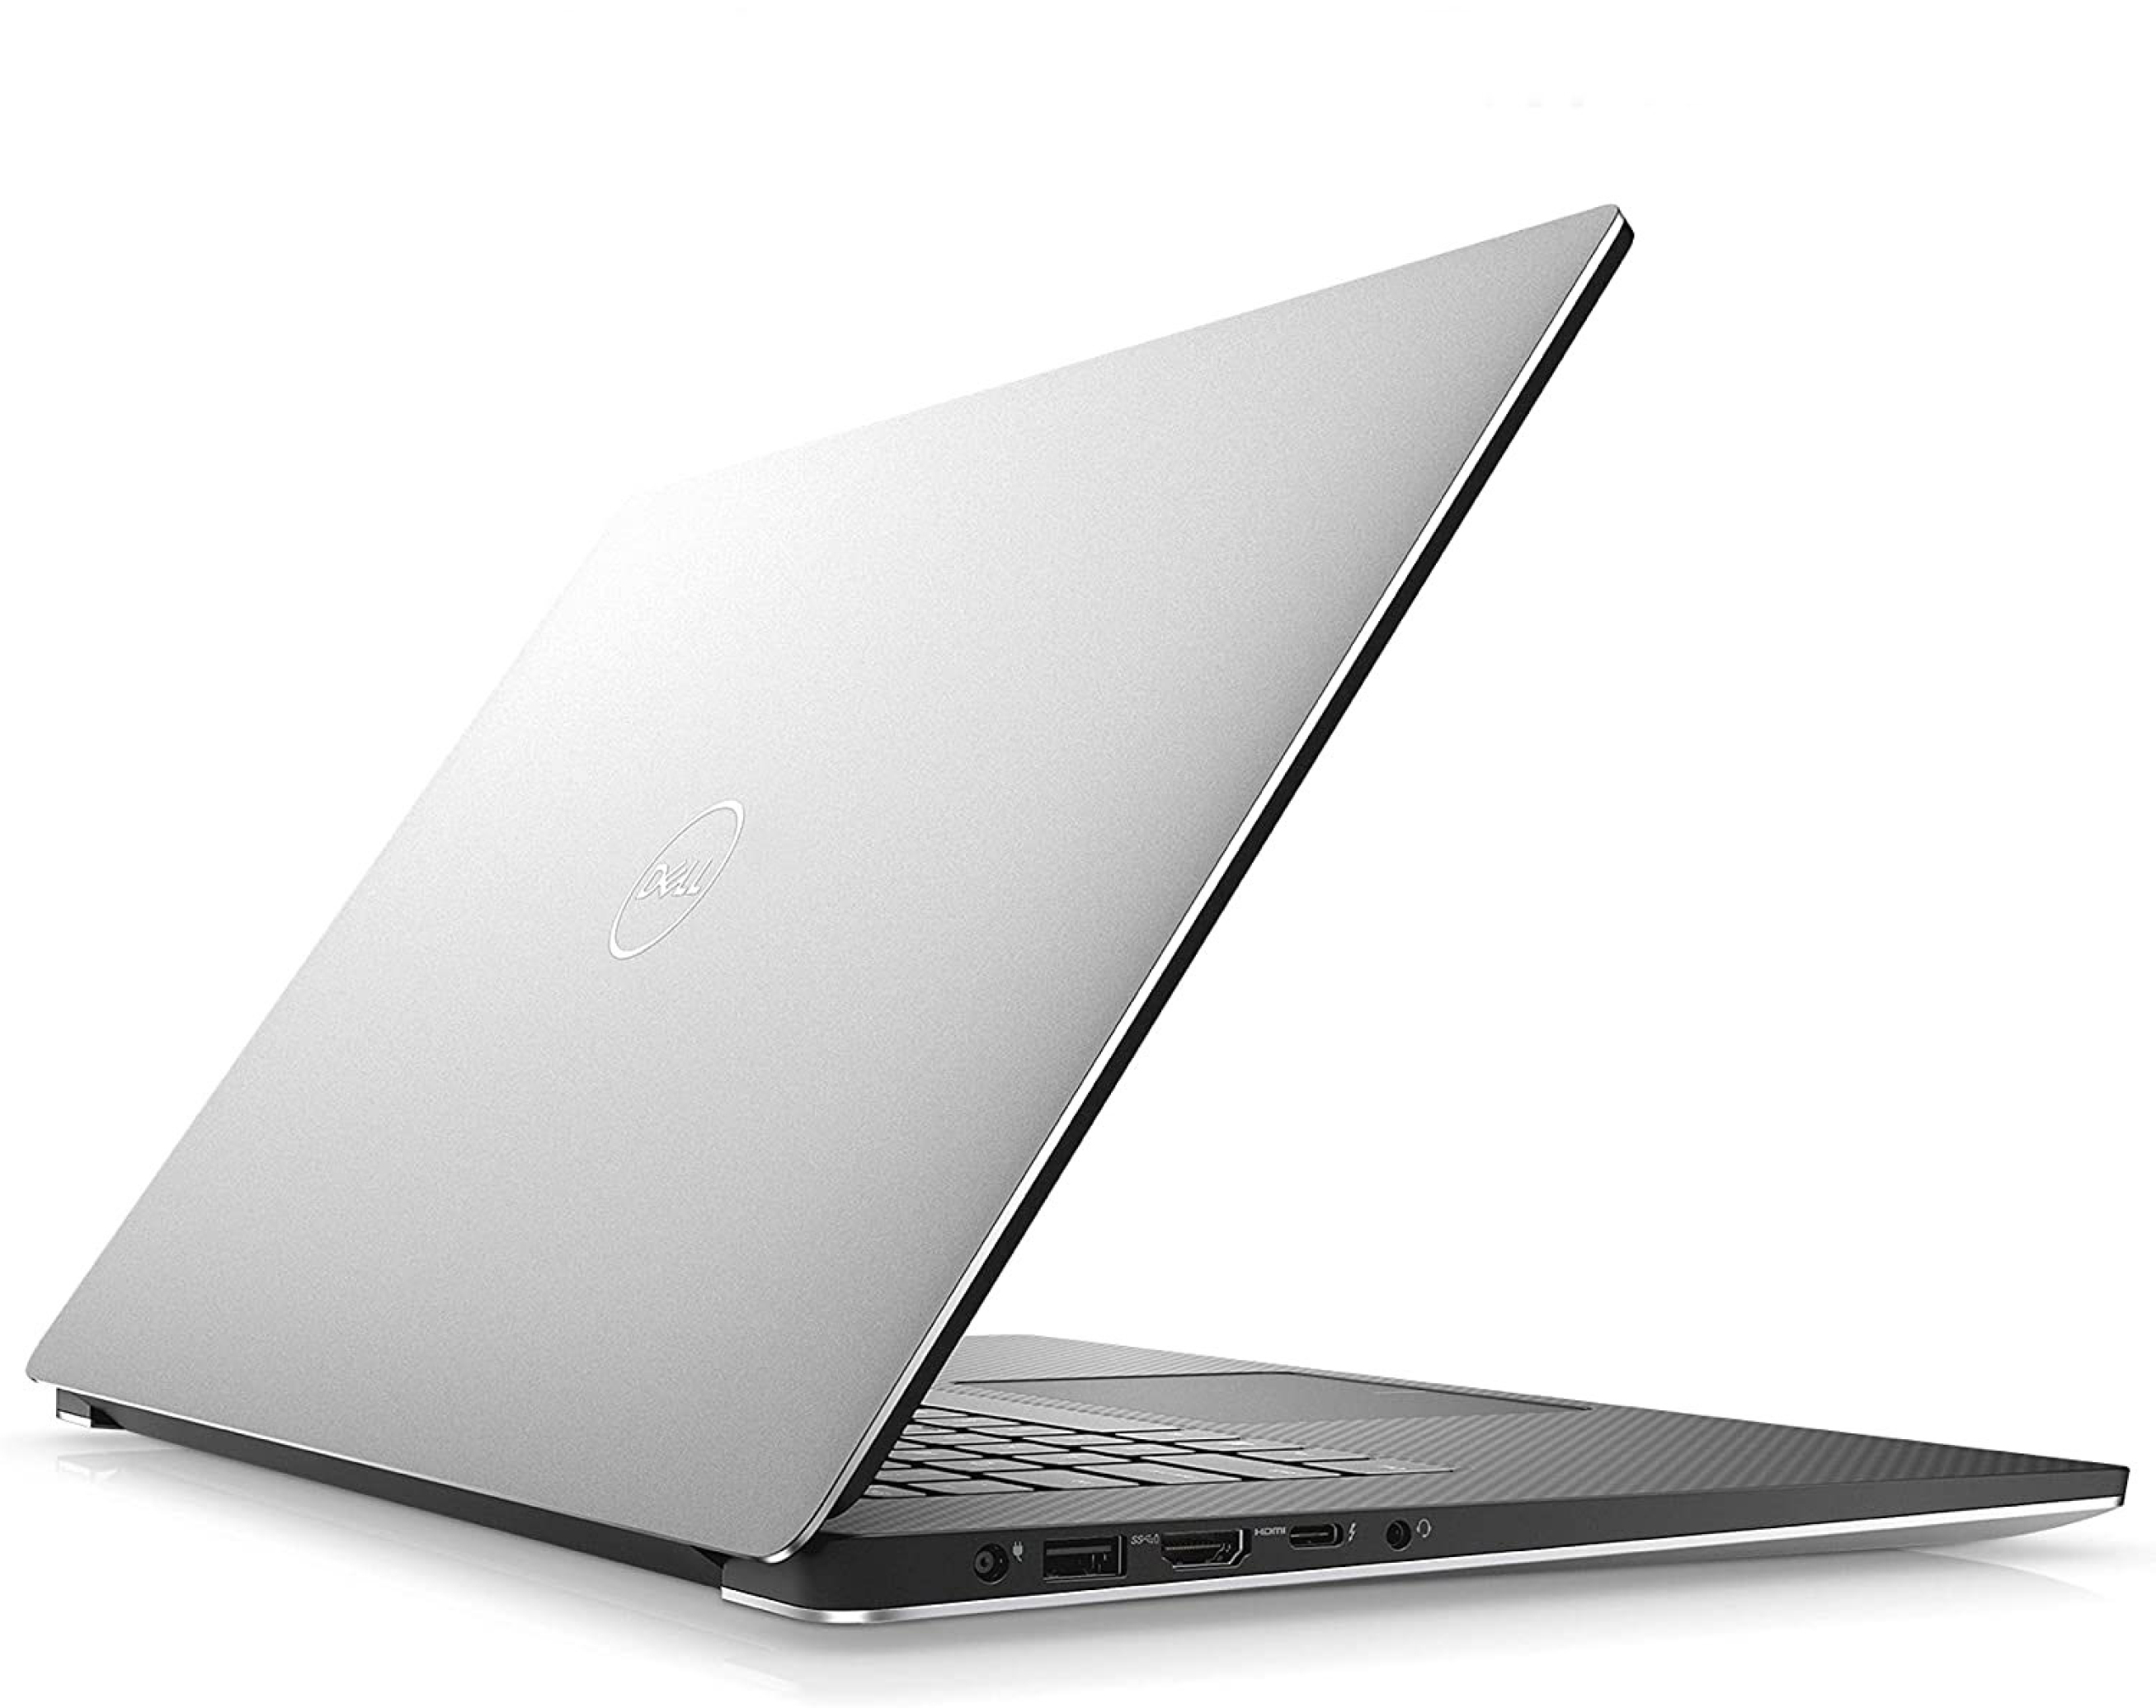  Dell Xps 15 7590 